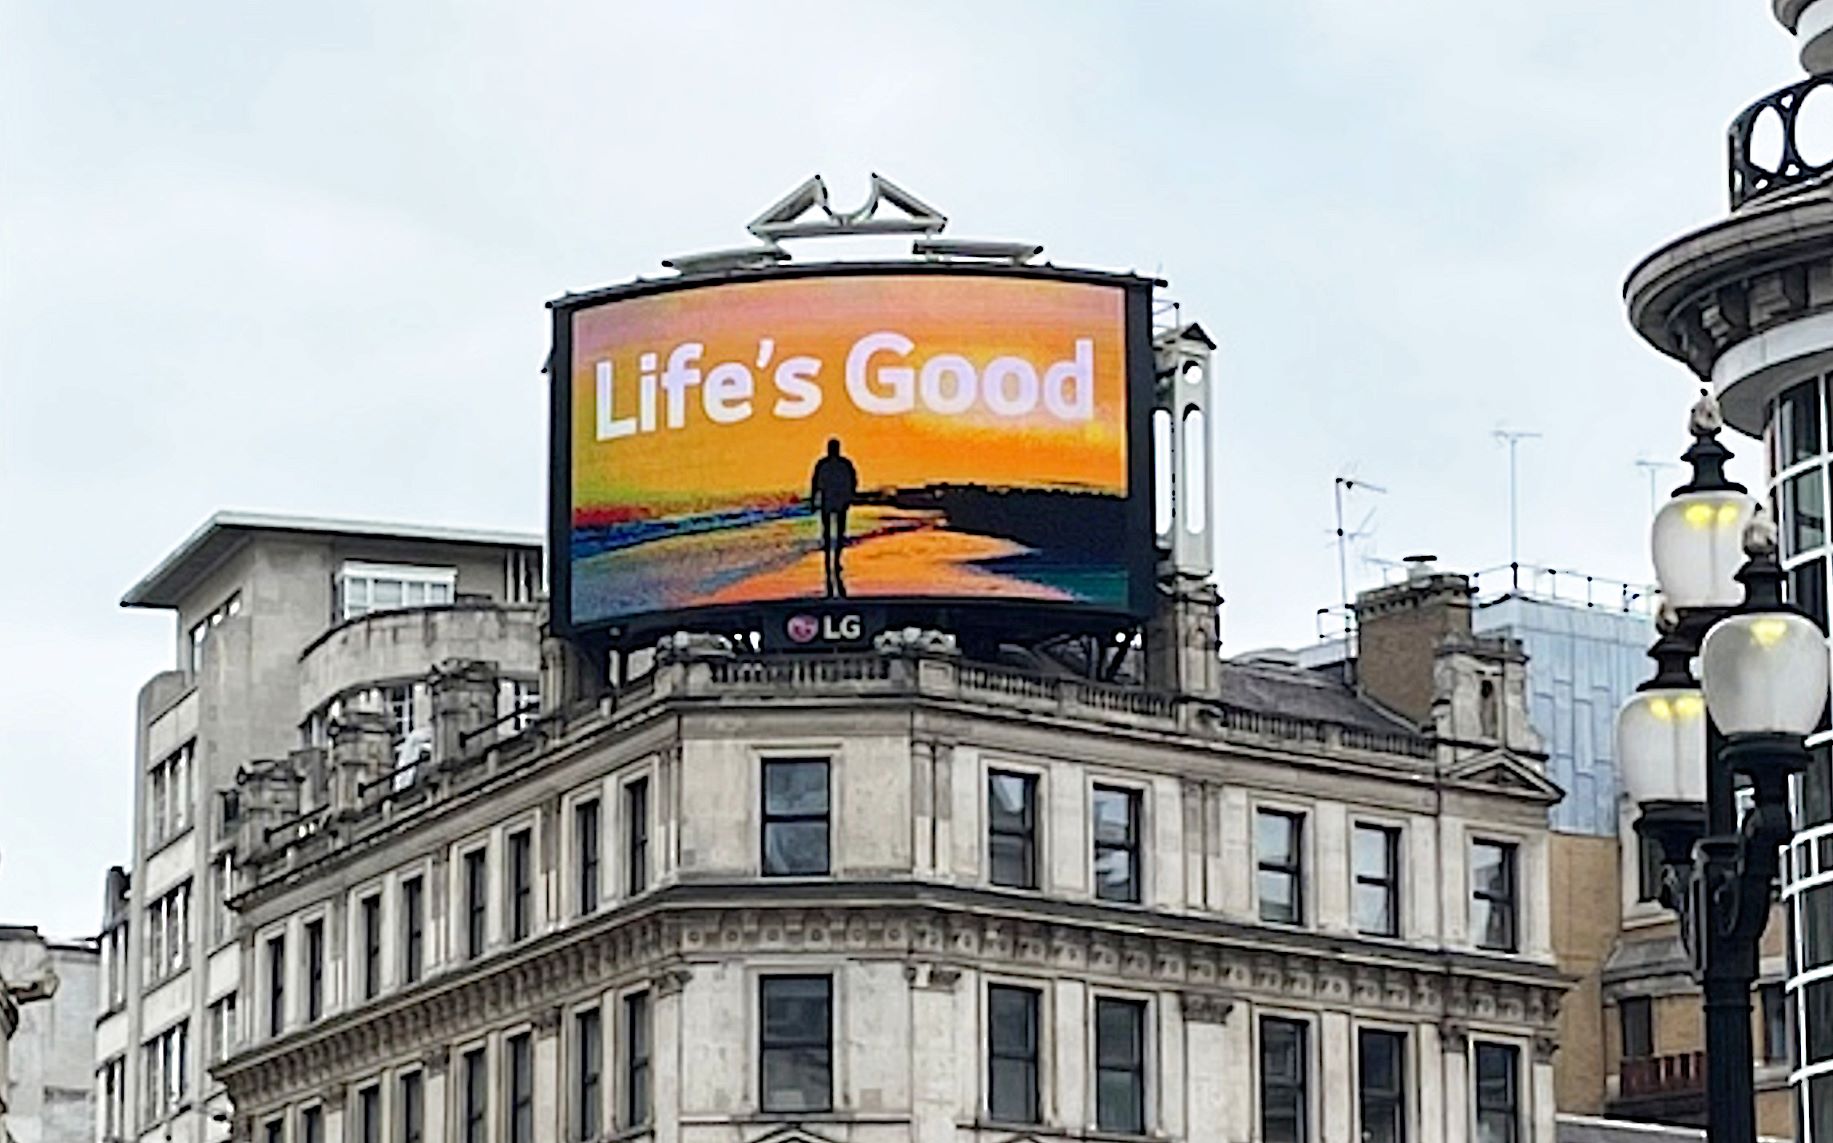 Lifes Good Film London Piccadilly Circus